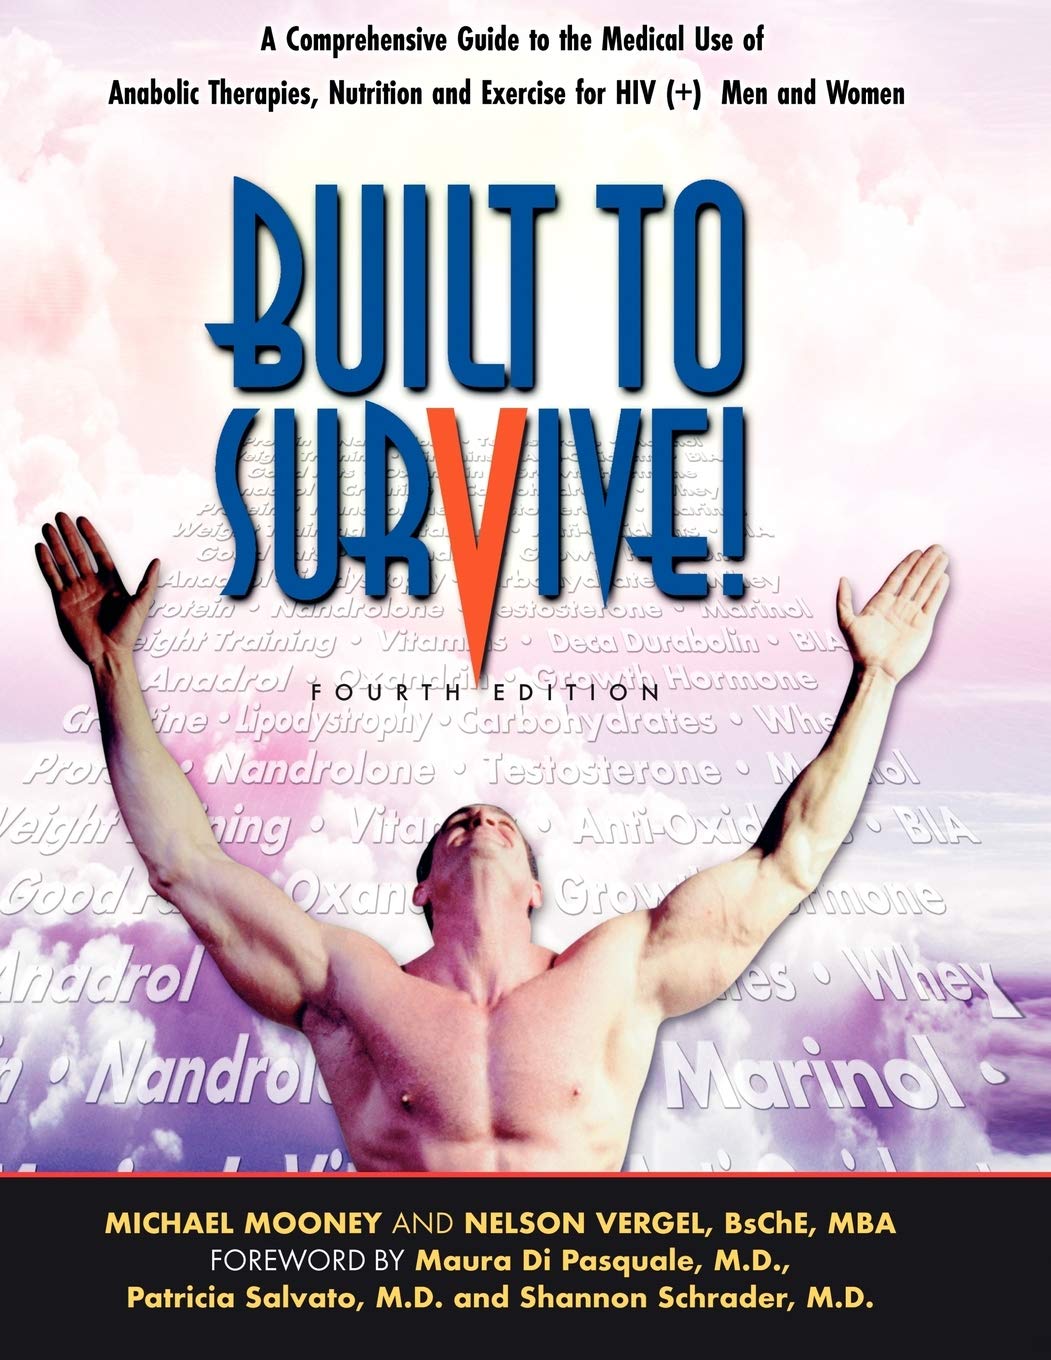 Built to Survive: A Comprehensive Guide to the Medical Use of Anabolic Therapies, Nutrition and Exercise for HIV+ Men and Women - CA Corrections Book Store